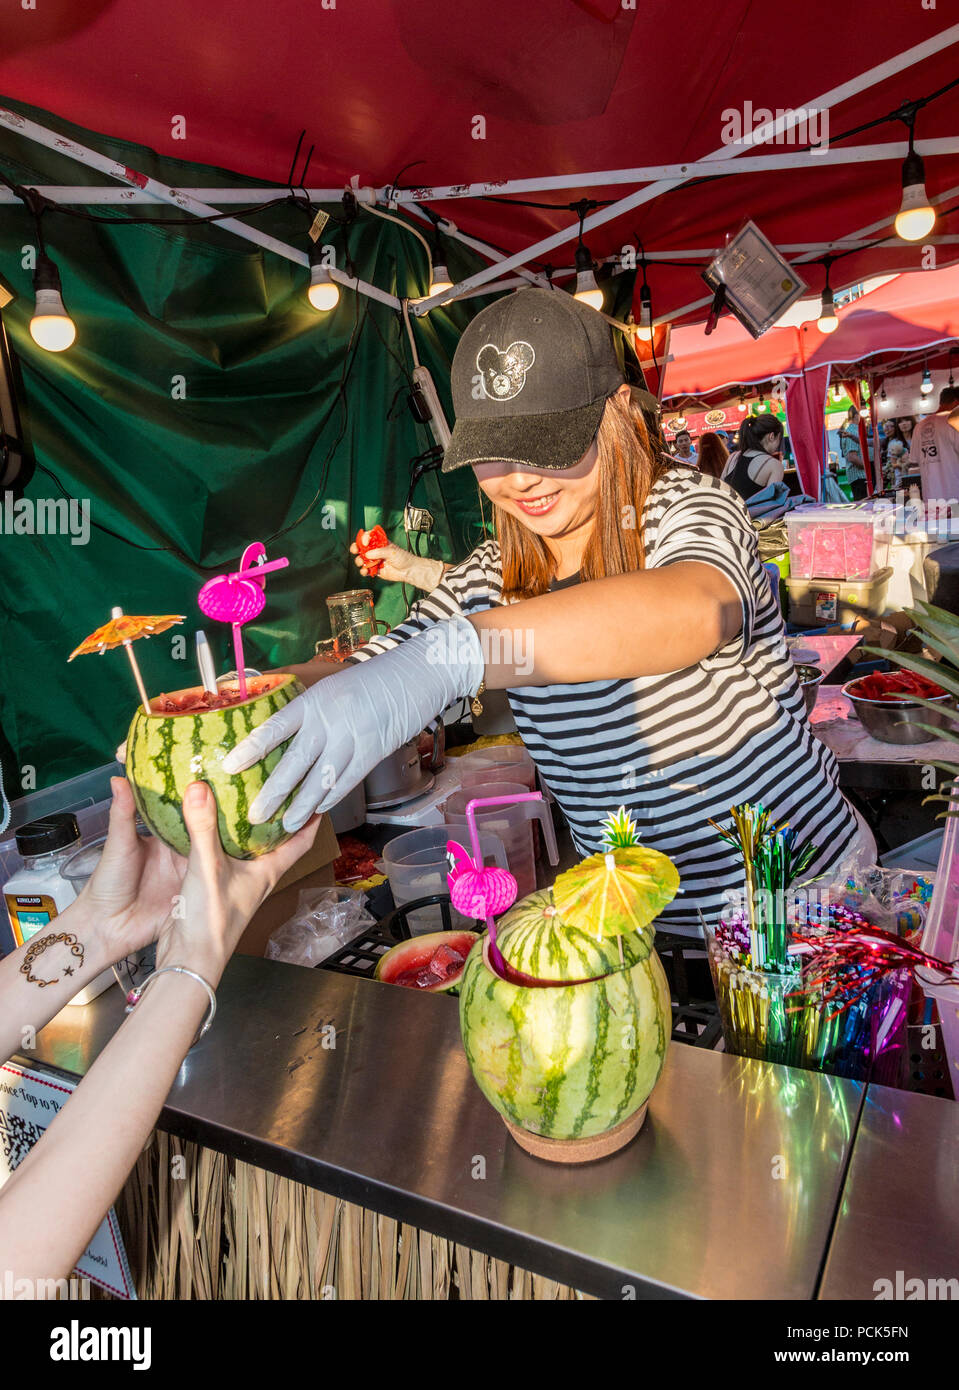 Drink in a real fruit cup at Richmond  Night Market, Richmond, BC, Canada. The market is open weekends and holiday Mondays during summer. Stock Photo